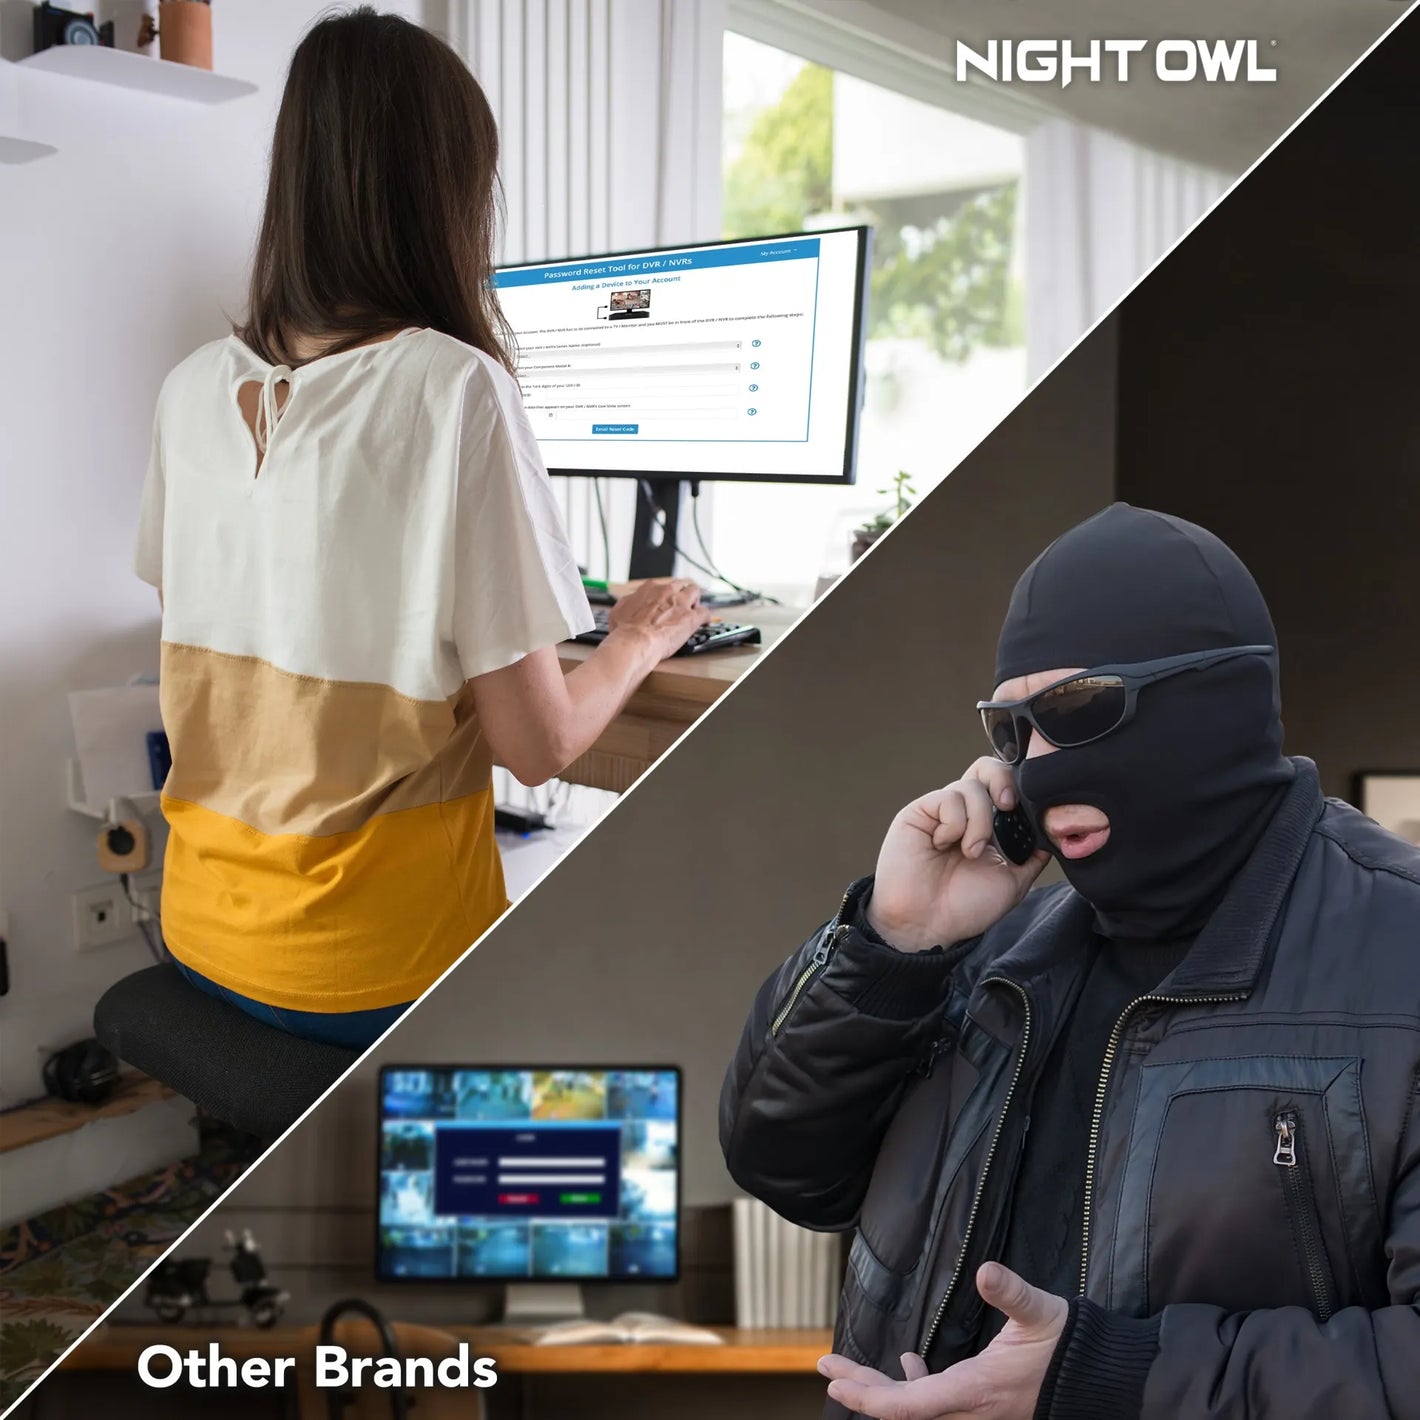 split screen show the safety of night owl vs other brands